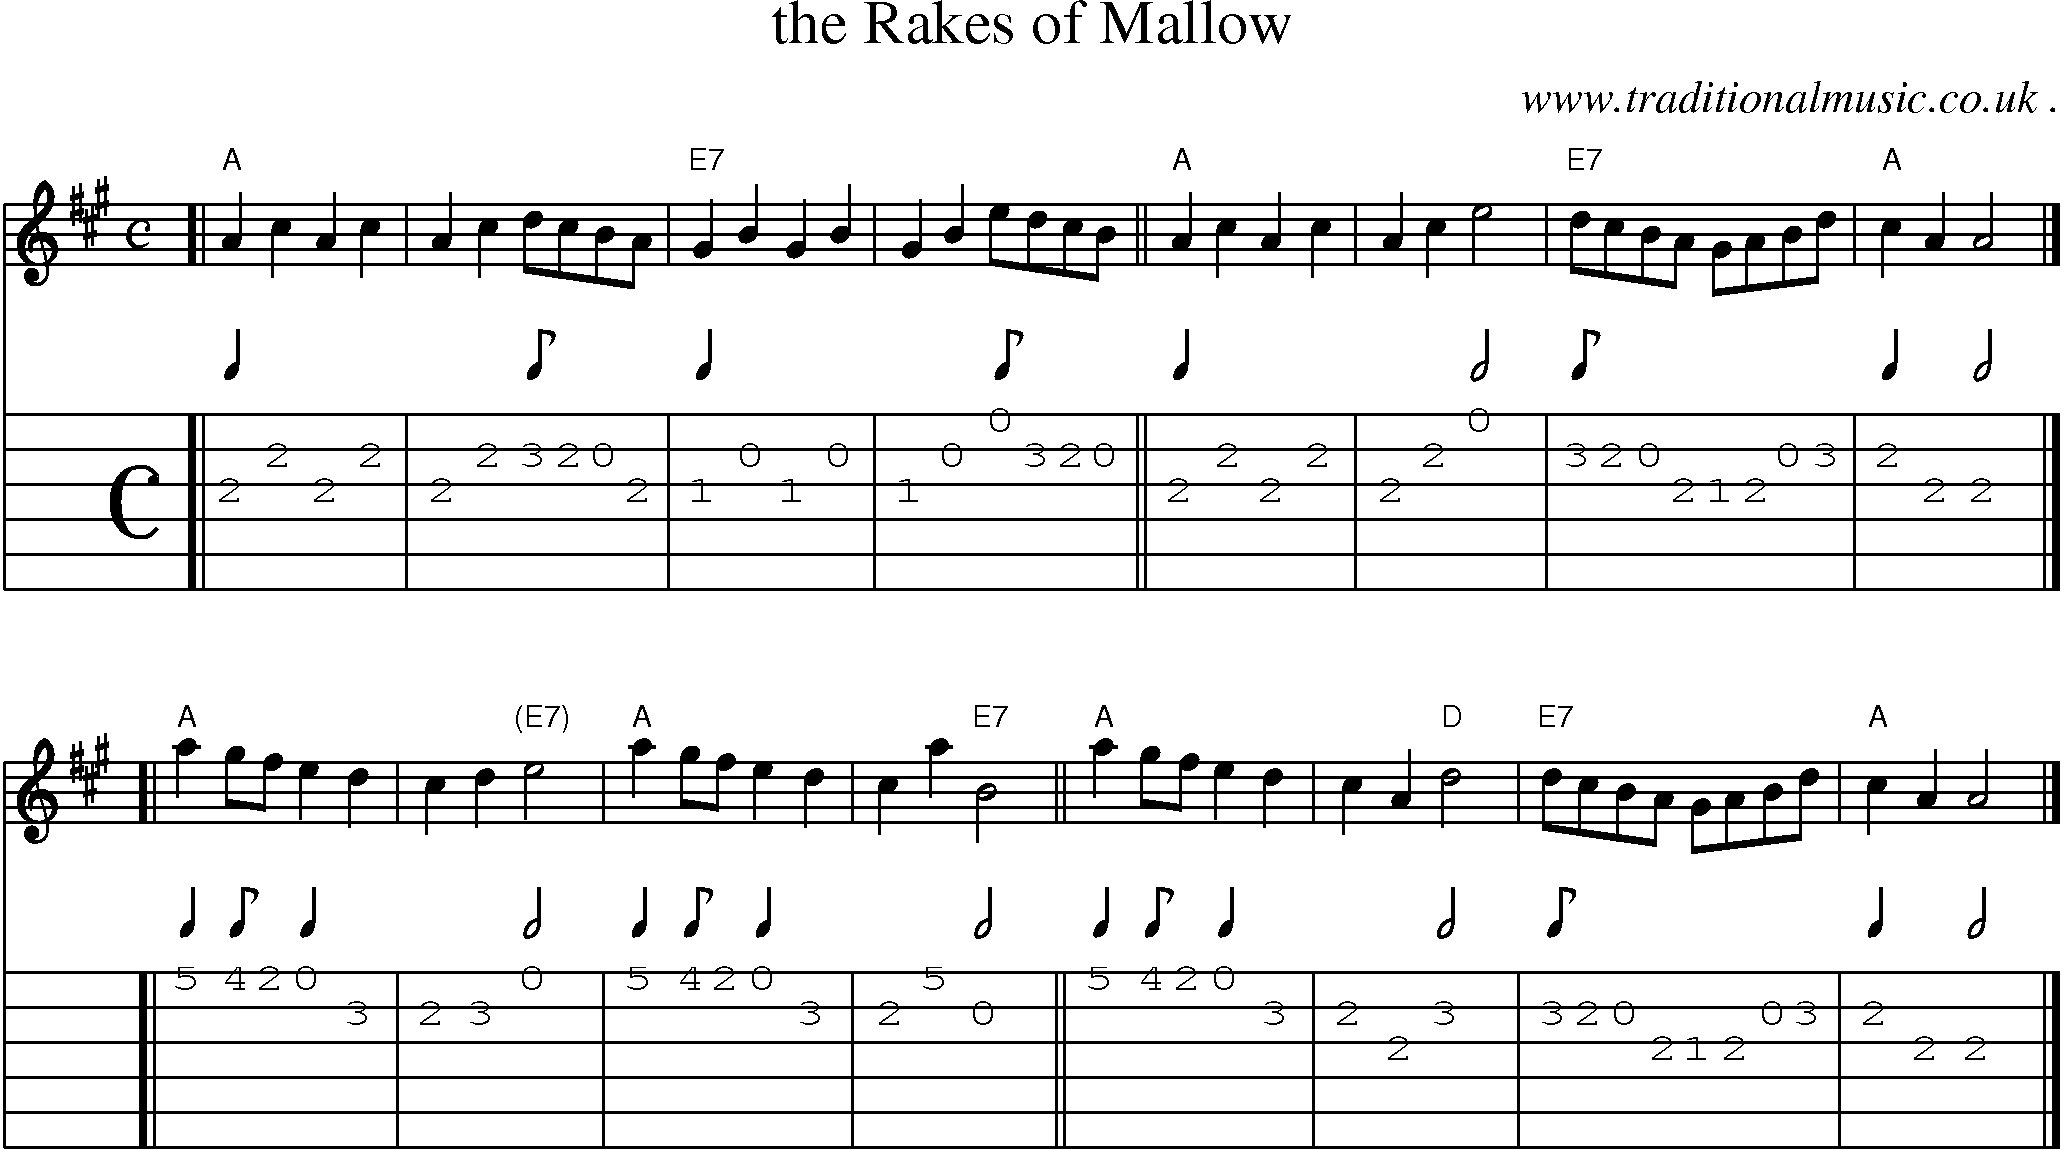 Sheet-music  score, Chords and Guitar Tabs for The Rakes Of Mallow